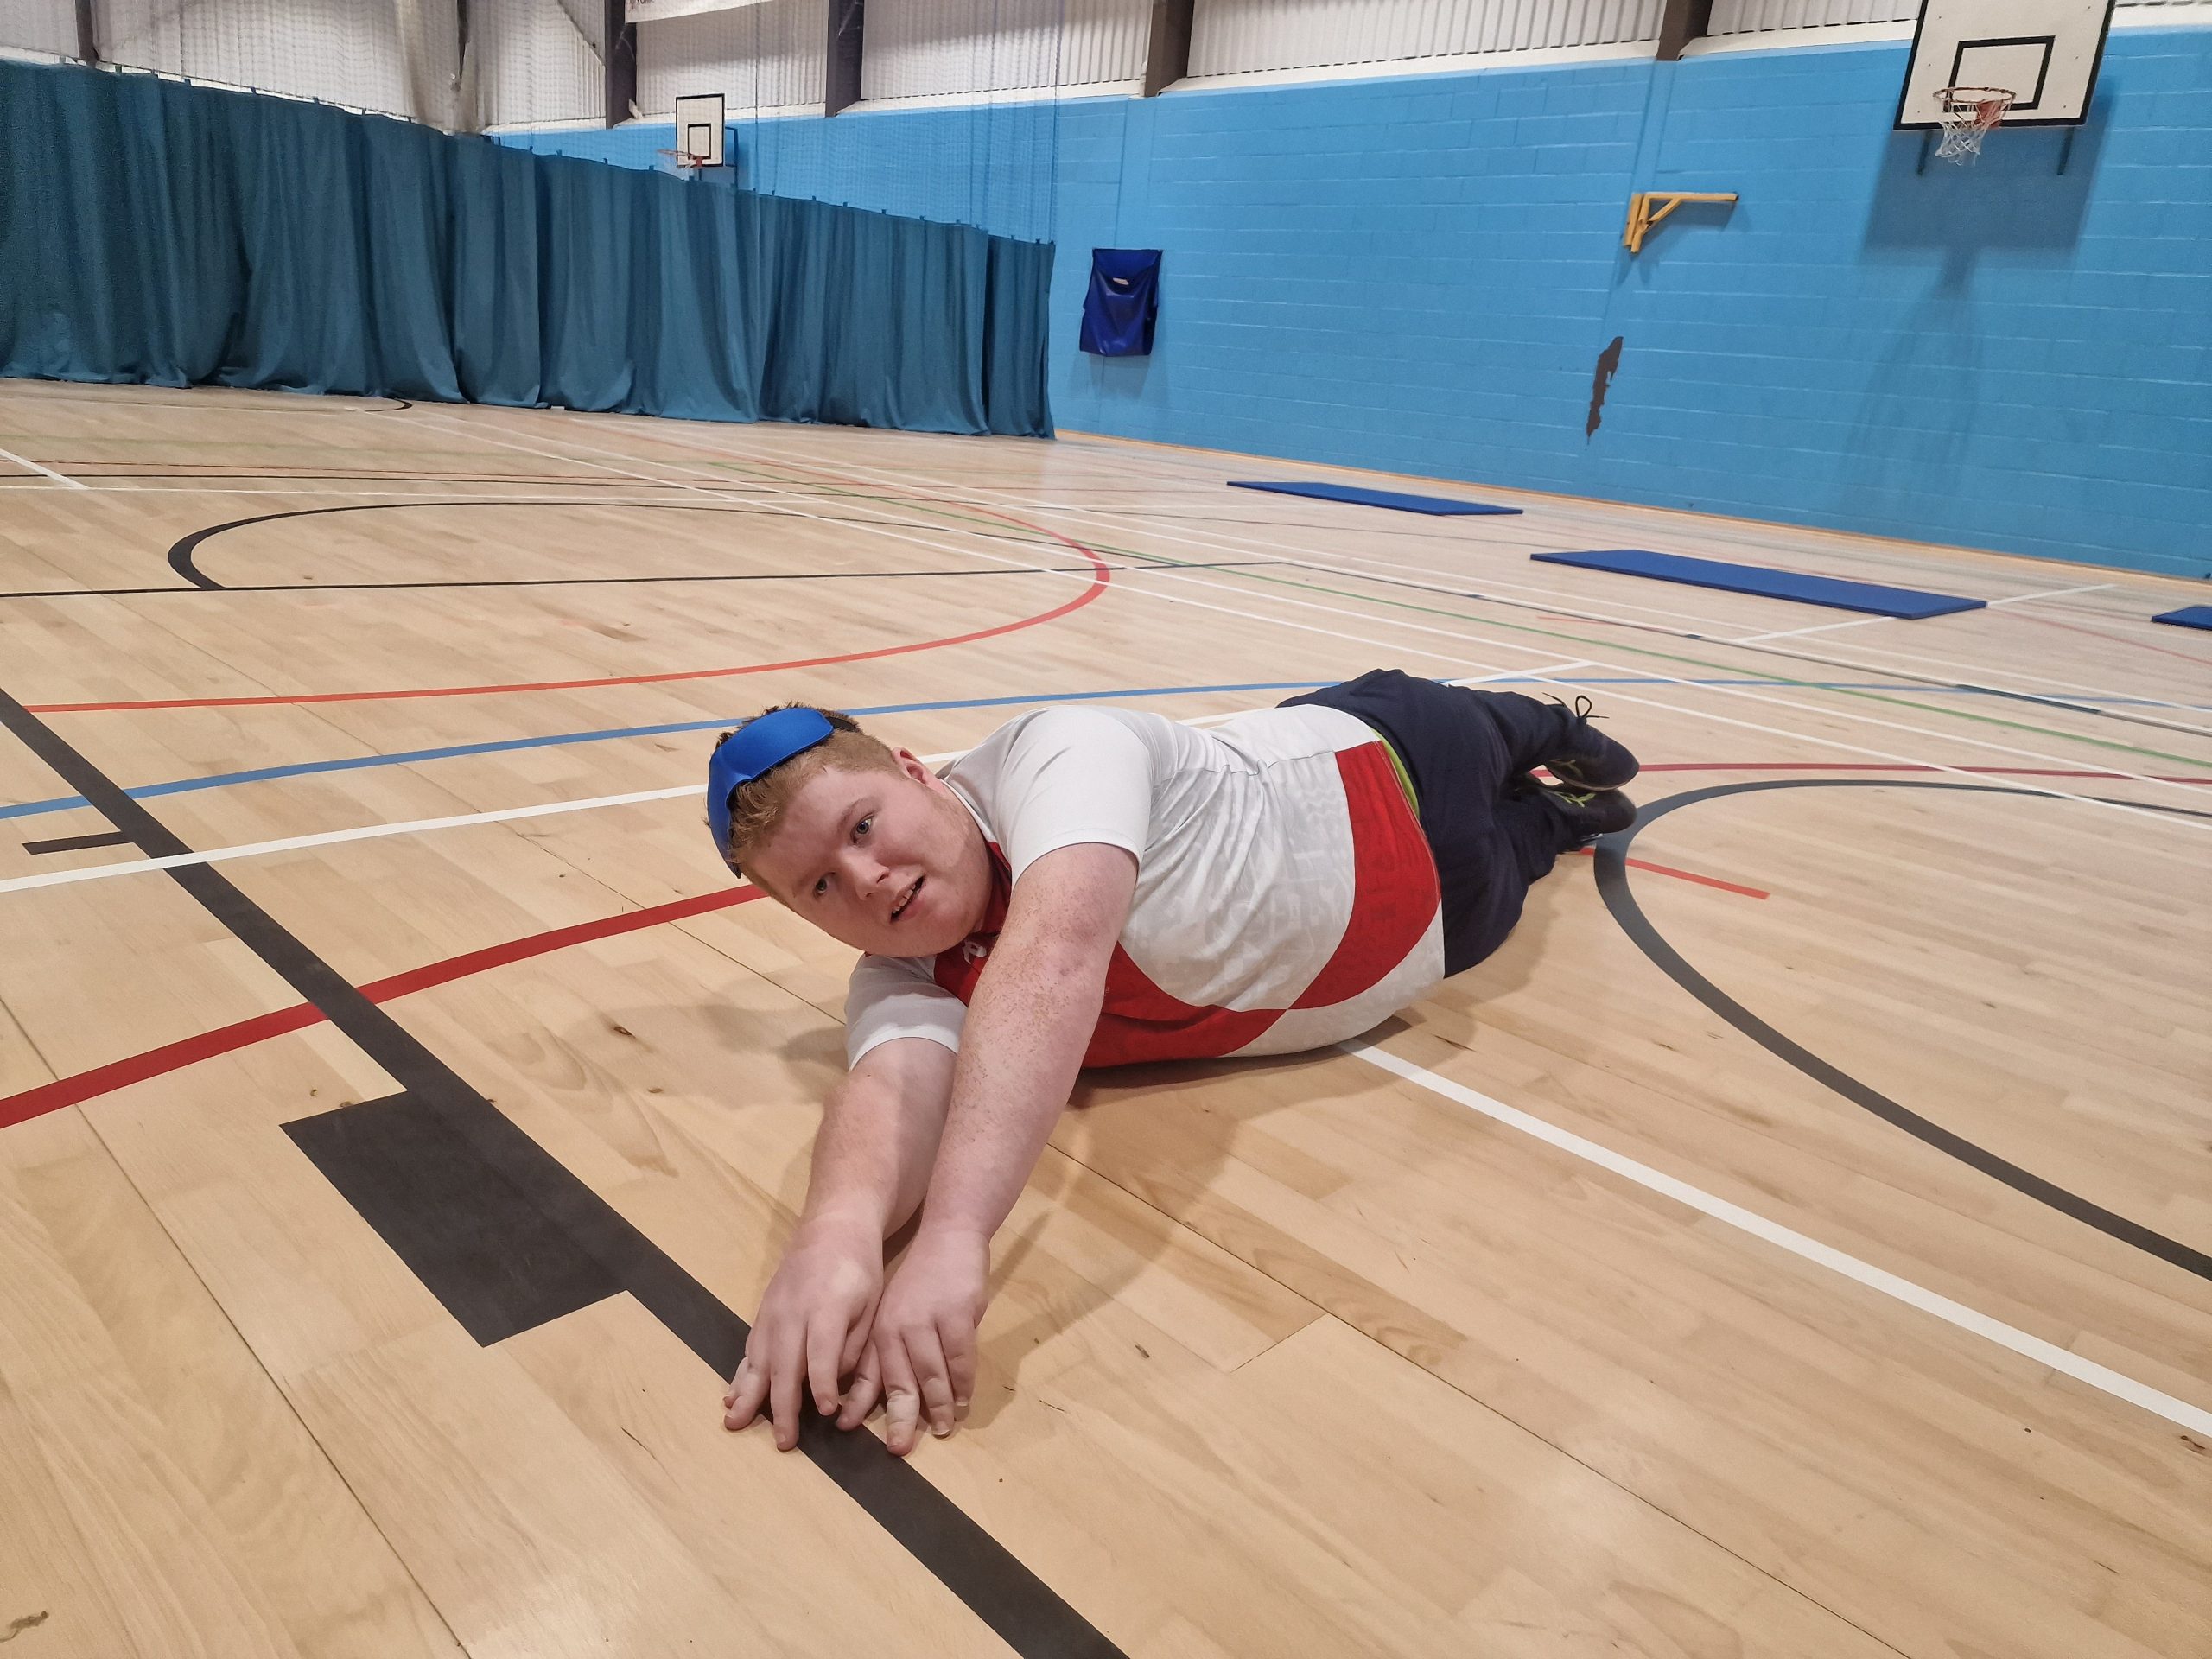 Oliver, 19, poised on ground waiting to catch a ball, in a taster session with Goalball UK